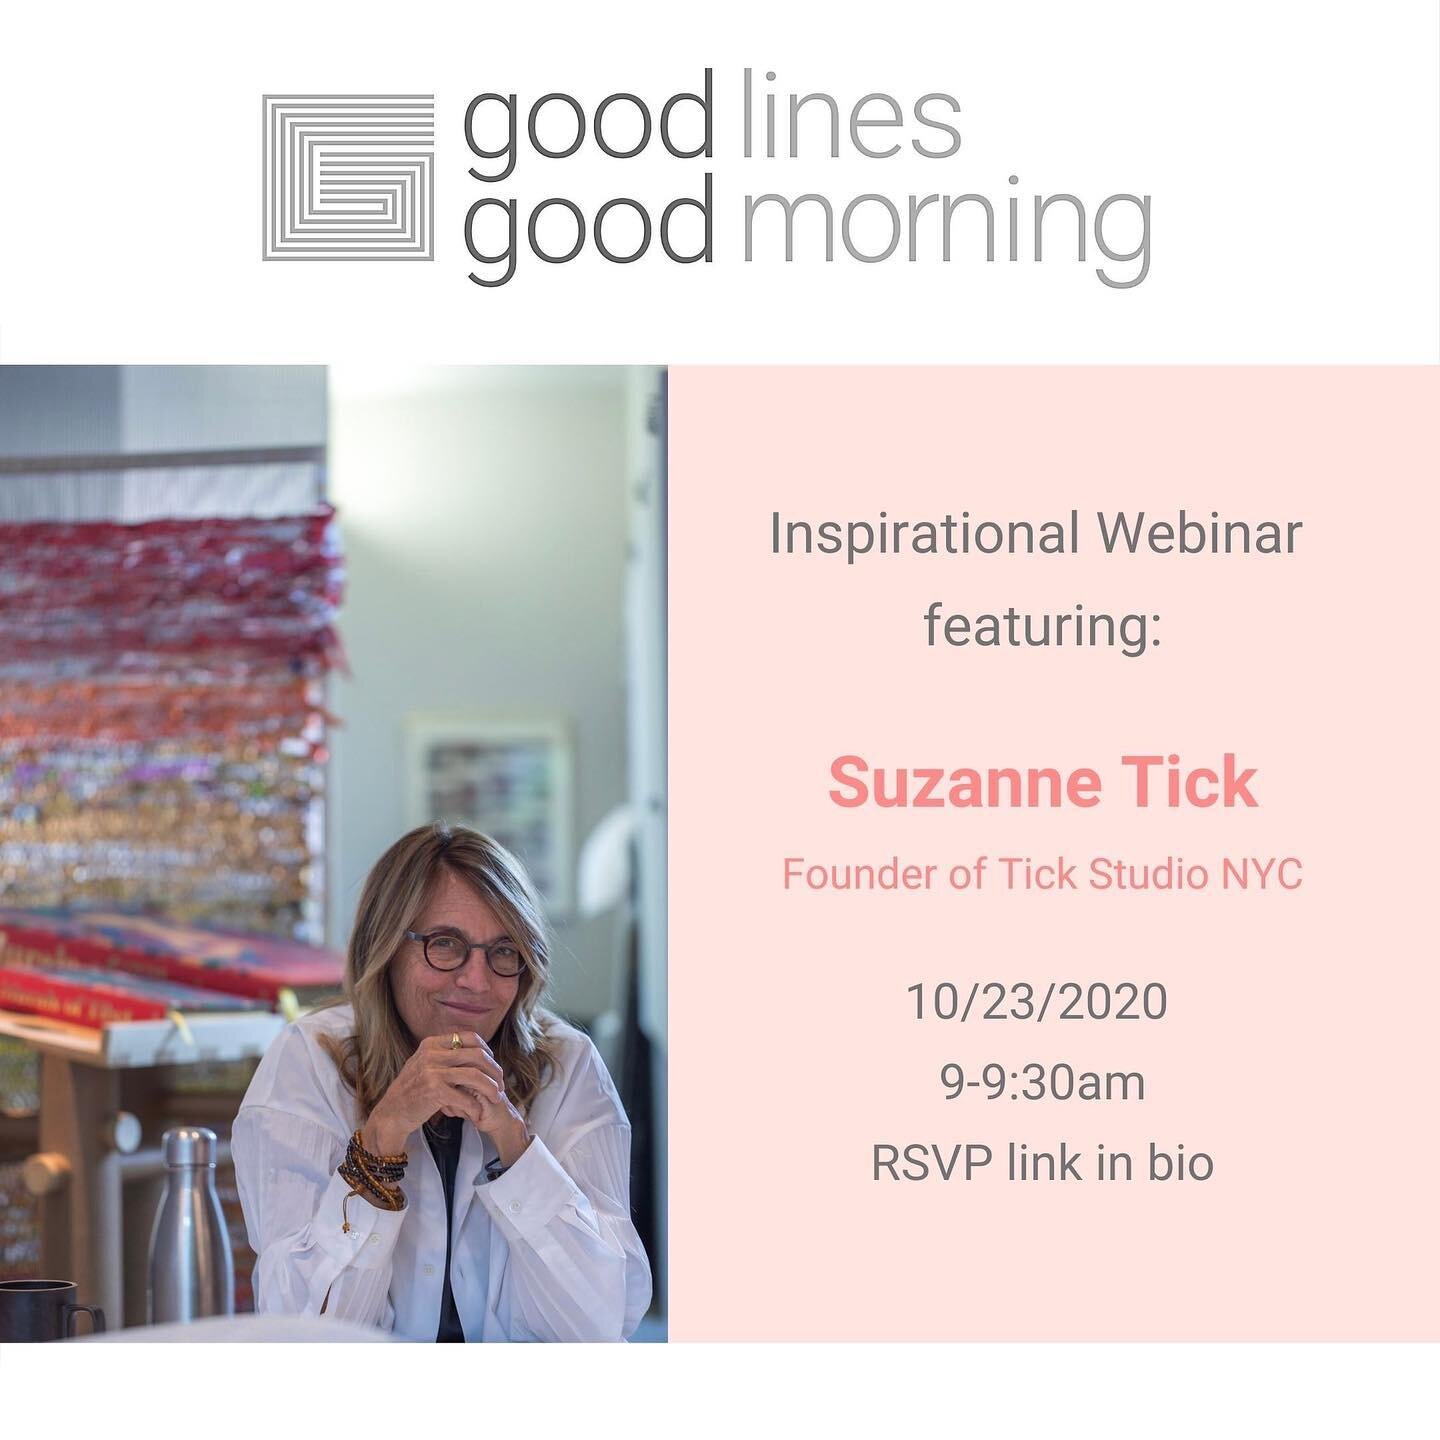 Good Lines Good Morning - Edition 2! ☕️ 
Join artist, designer and Vedic meditation teacher Suzanne Tick for a 20 minute inspirational talk celebrating how the cycle of nature operates and organizes around the notion of creation. Her talk, titled Cre